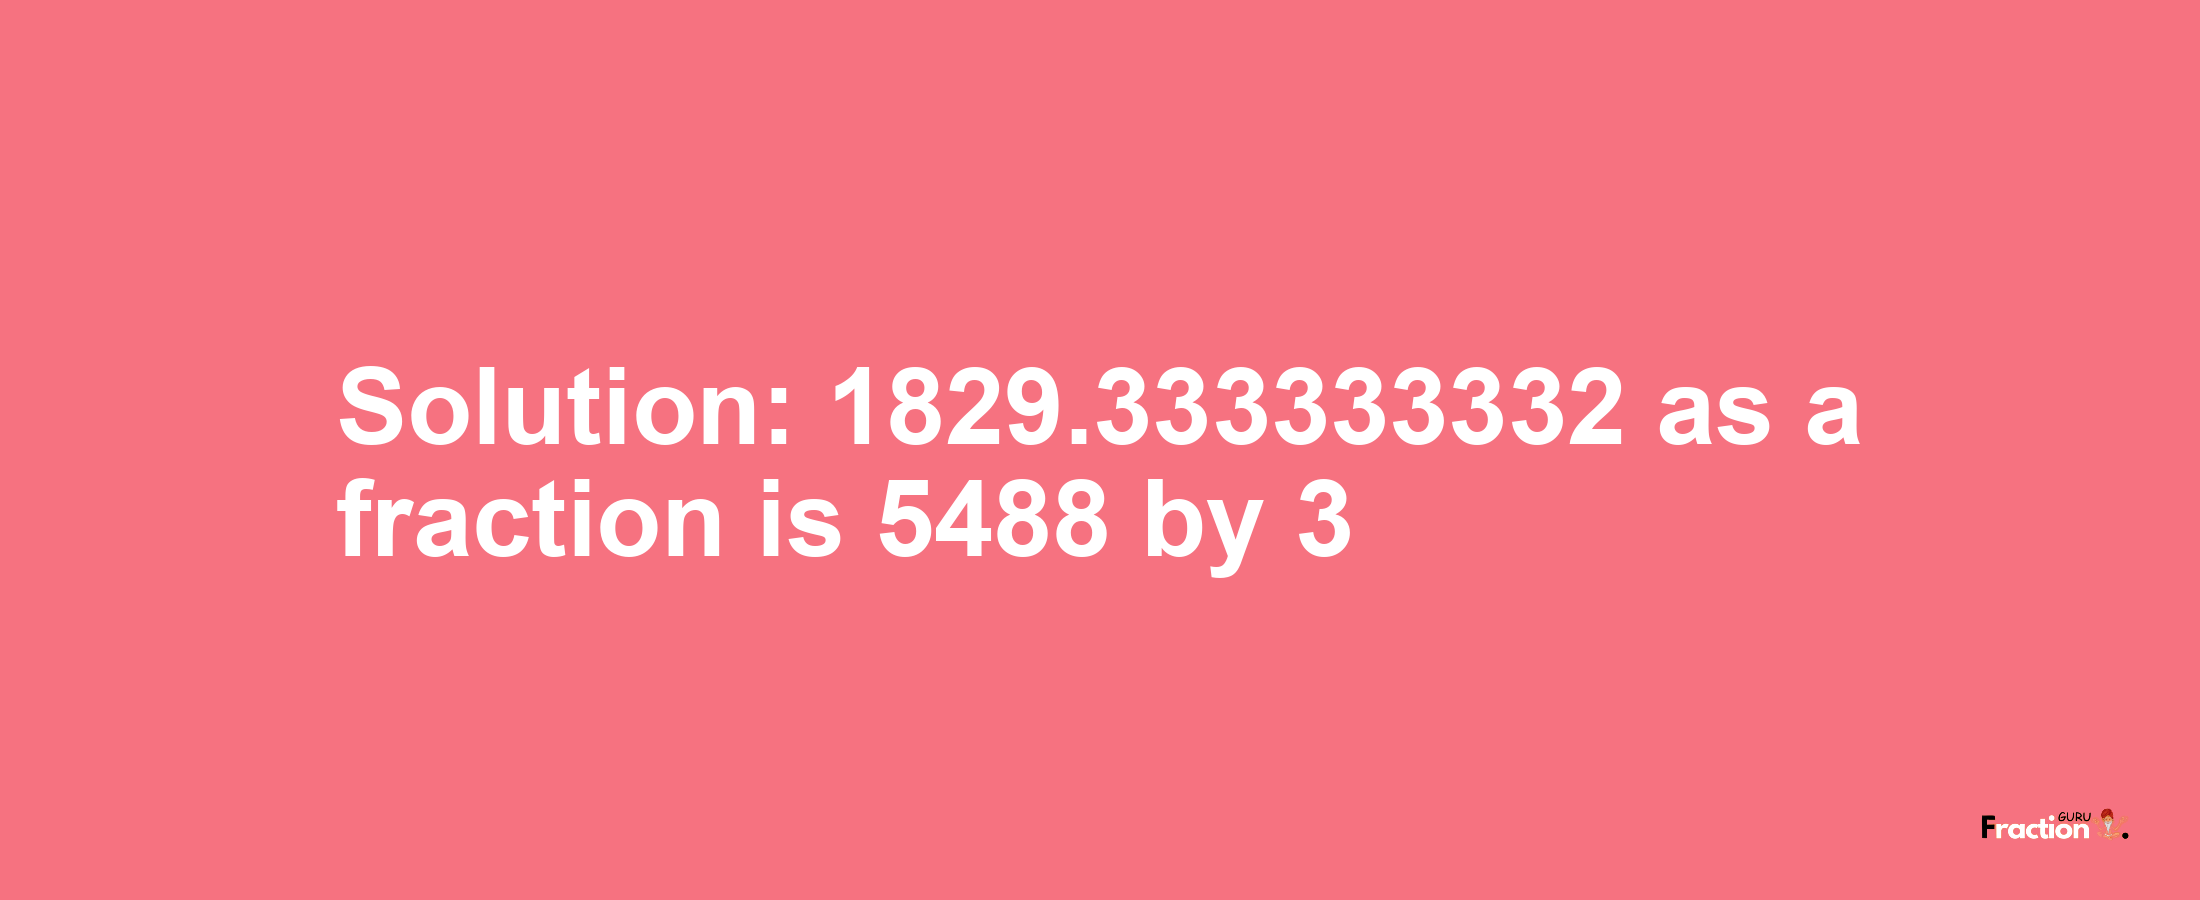 Solution:1829.333333332 as a fraction is 5488/3